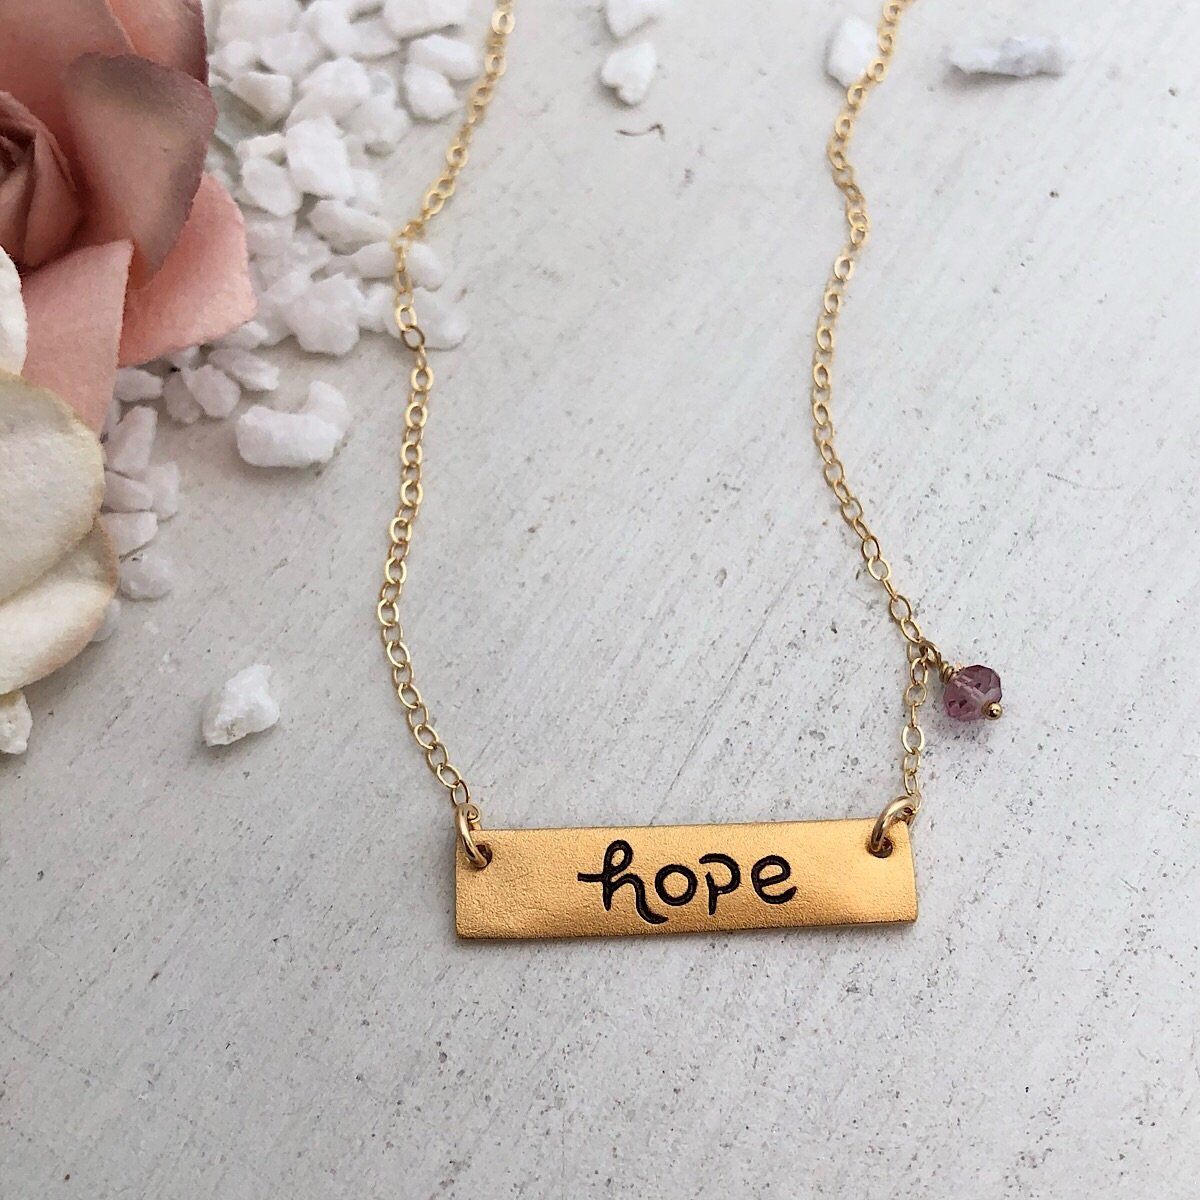 Hope Necklace - IsabelleGraceJewelry